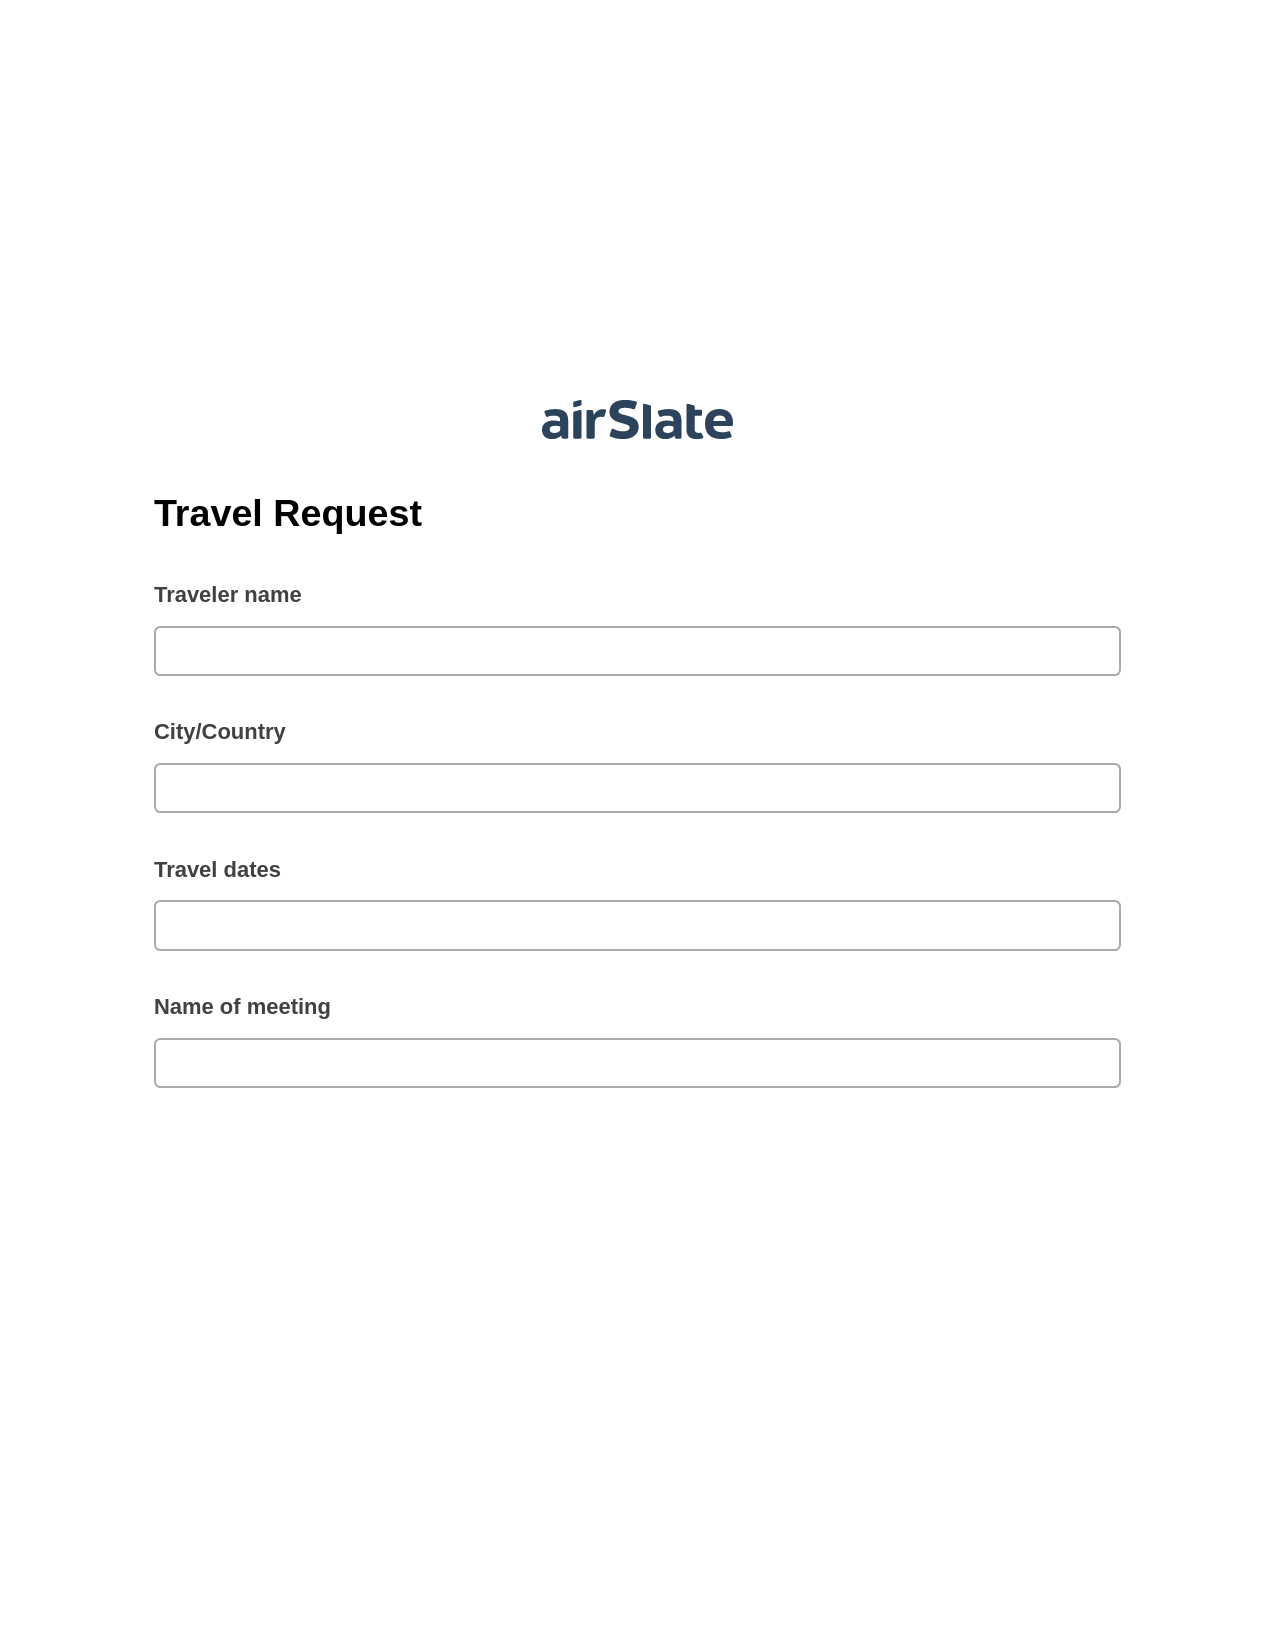 Travel Request Pre-fill Slate from MS Dynamics 365 Records Bot, Update Salesforce Record Bot, Archive to SharePoint Folder Bot